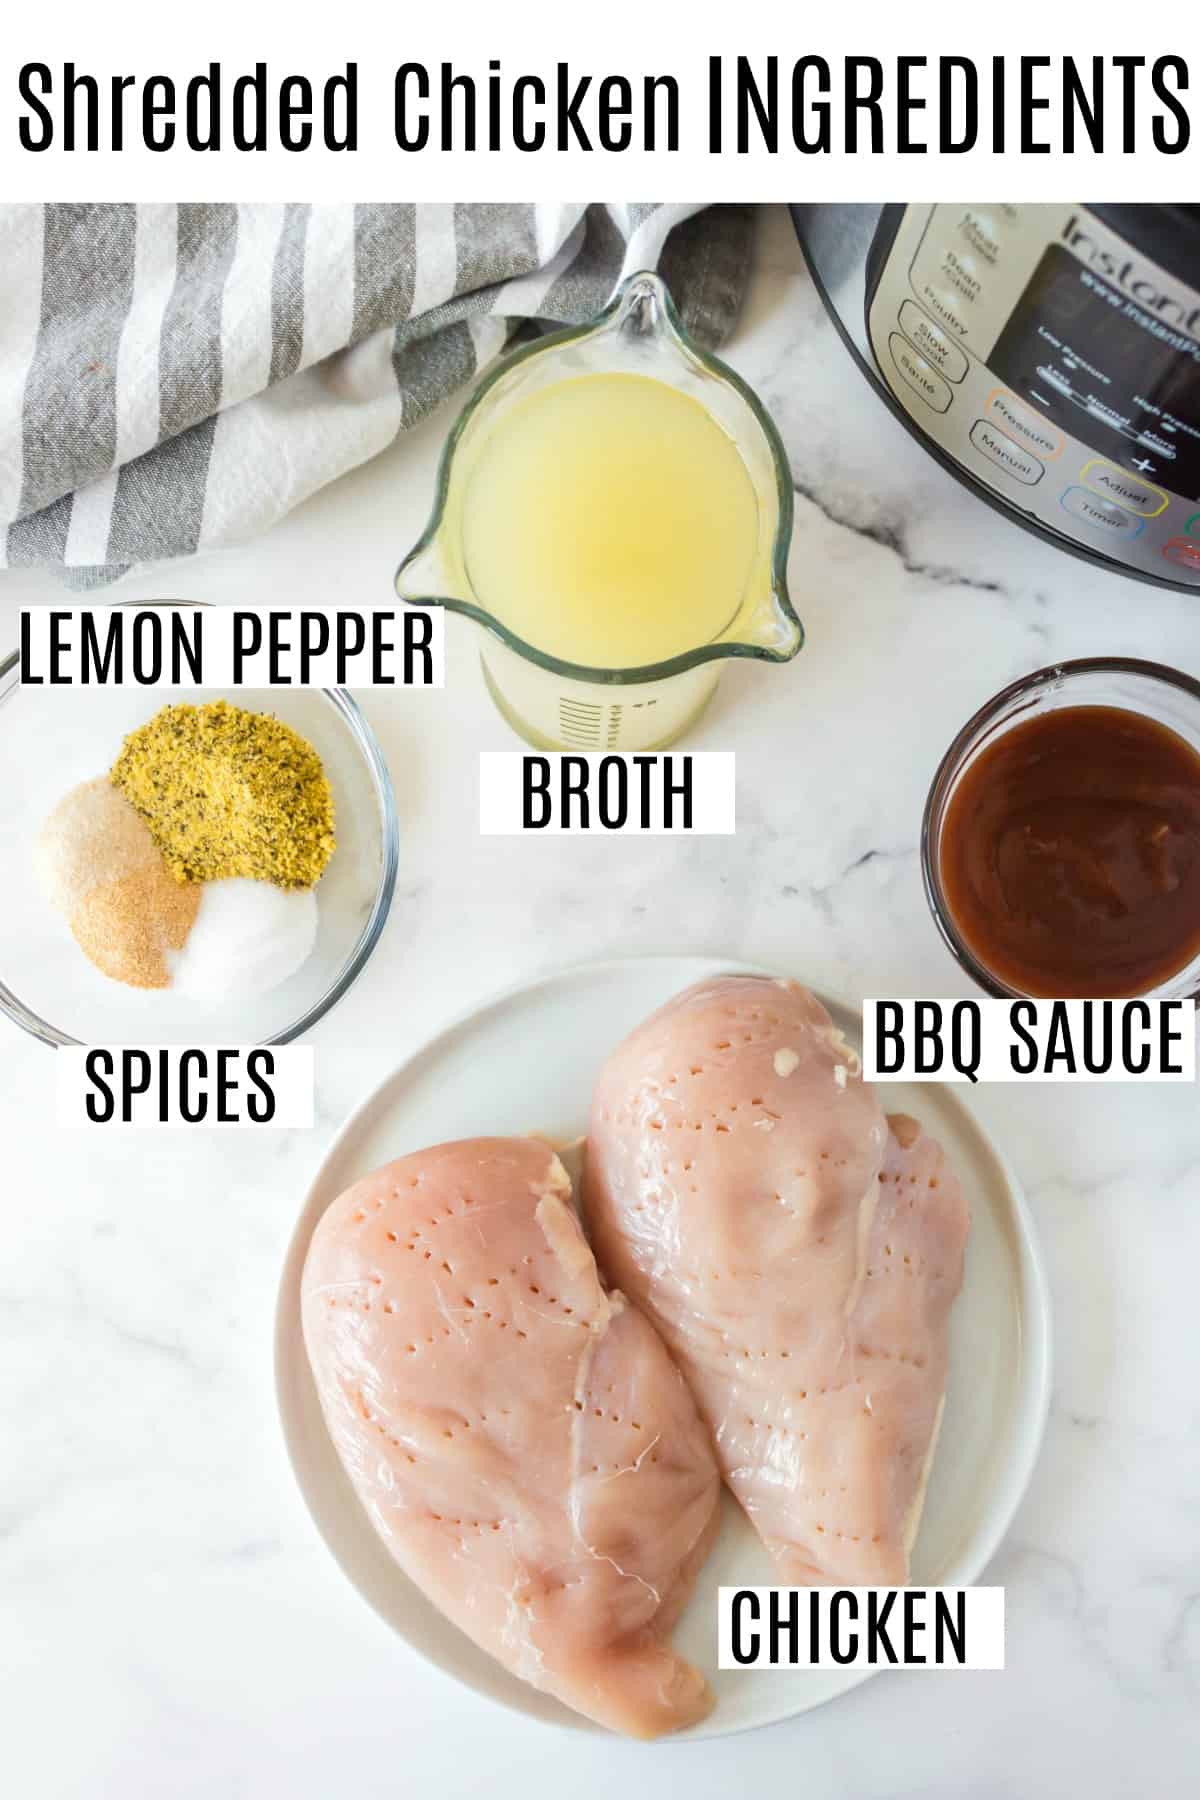 Ingredients needed to make shredded chicken breast in the instant pot included spices and broth.